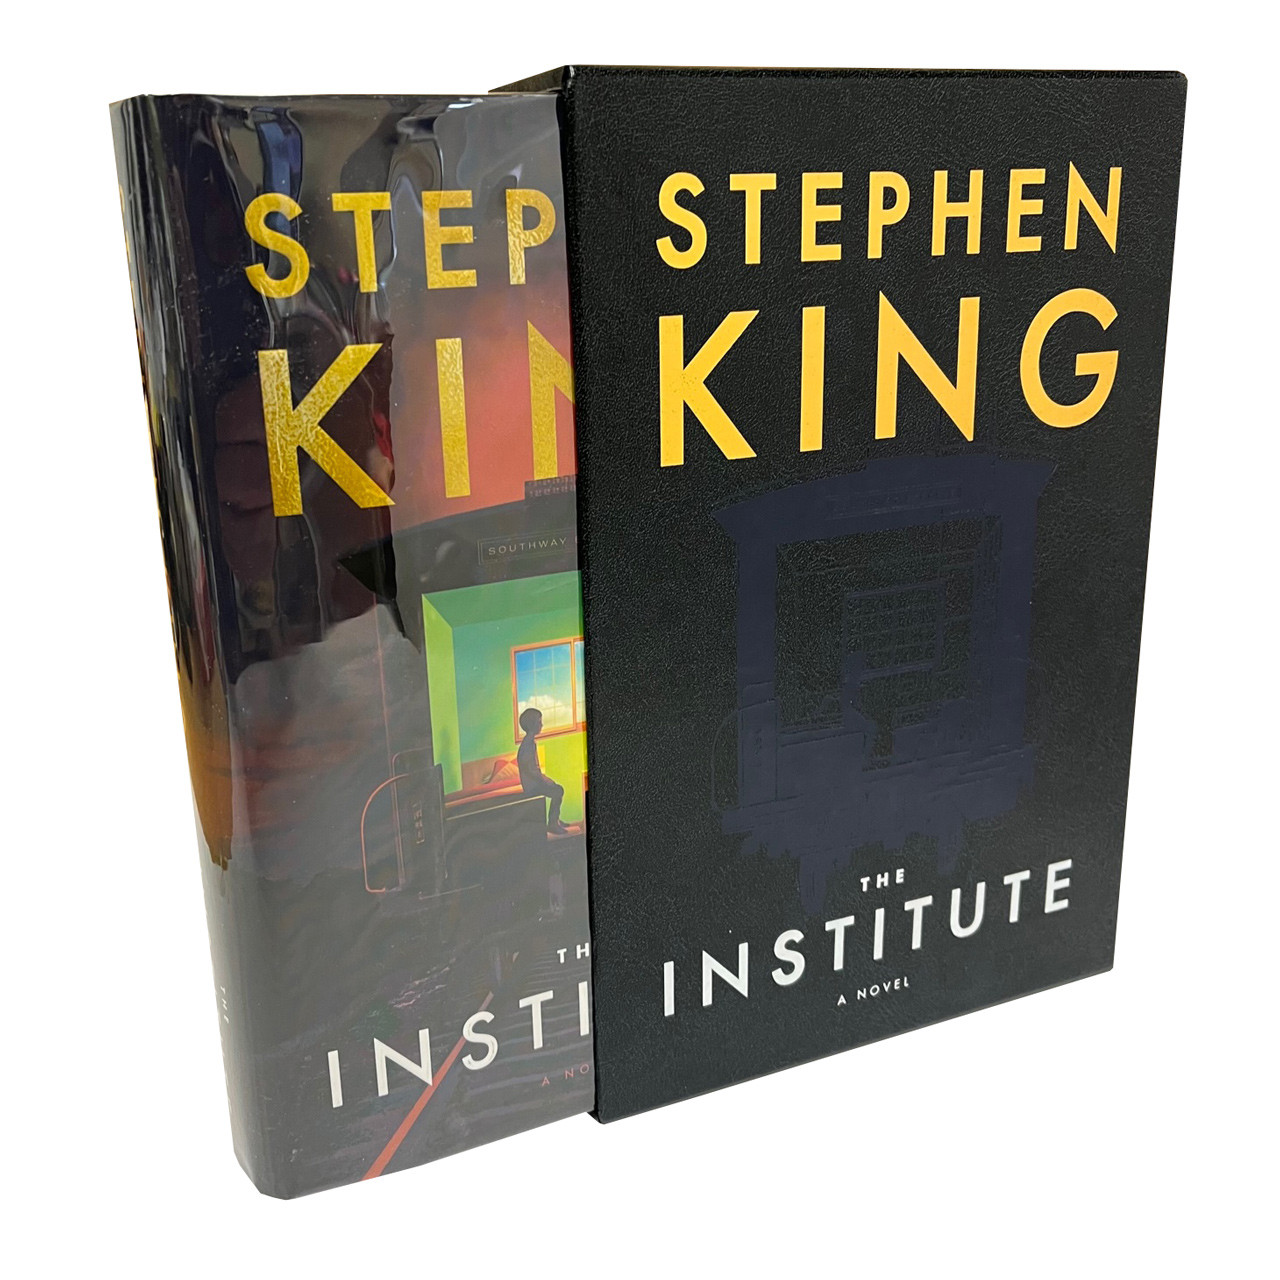 Stephen King "The Institute" Signed First Edition, First Printing, Slipcased w/COA [VF/VF Archival Sleeve Protection]